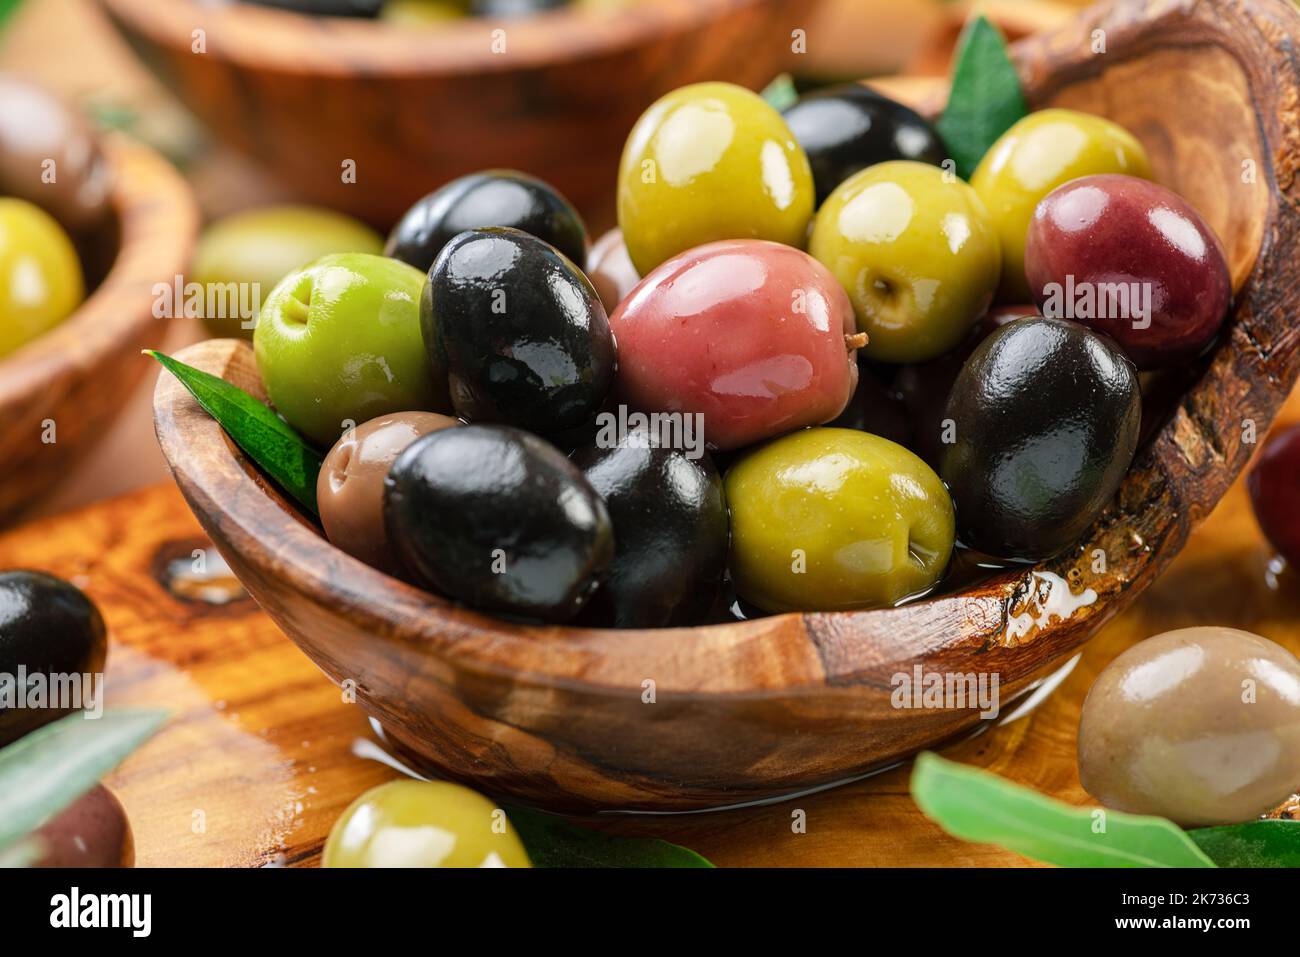 Kalamata, green and black olives in the wooden bowl. Food background. Stock Photo